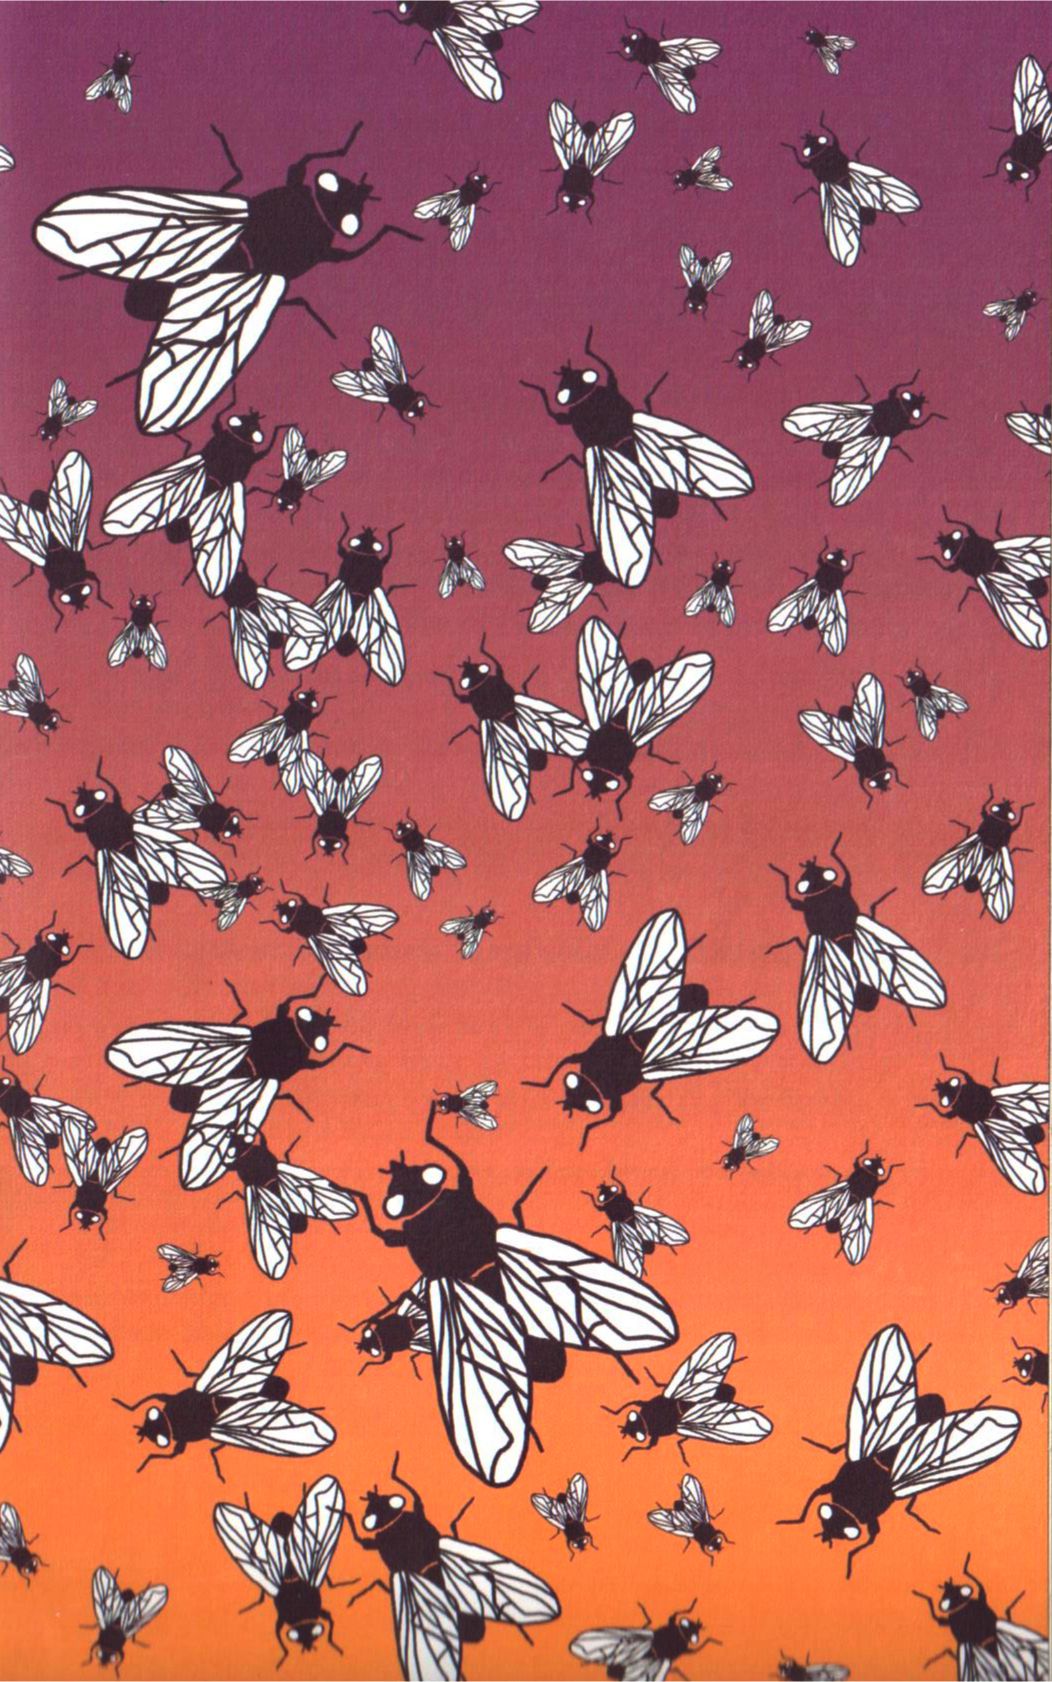 An illustration of flies from the inside cover of the novel.